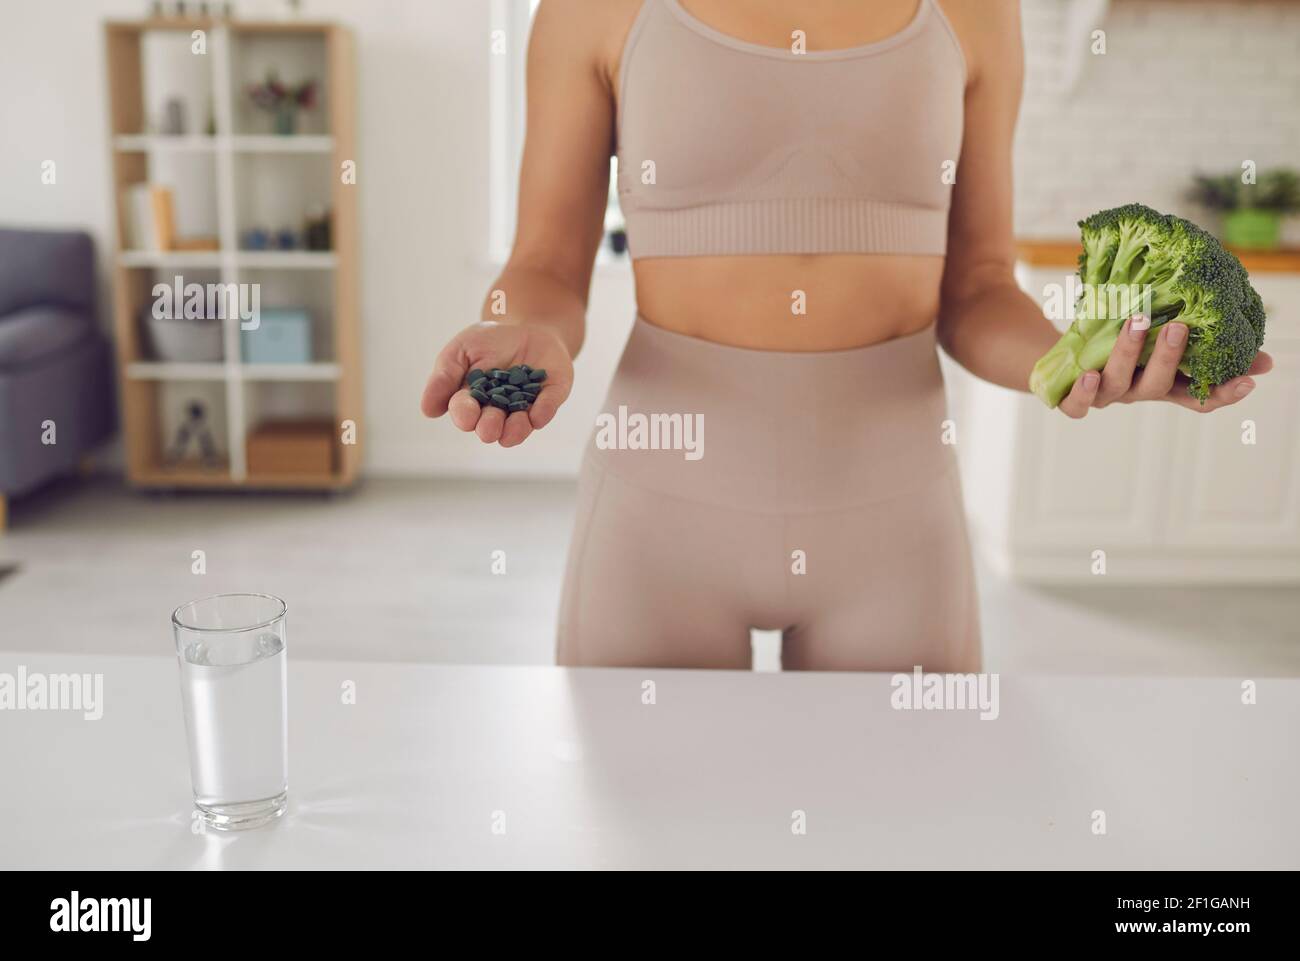 Body and hands of fitness woman athete in sportswear standing holding fresh healthy ingredients Stock Photo